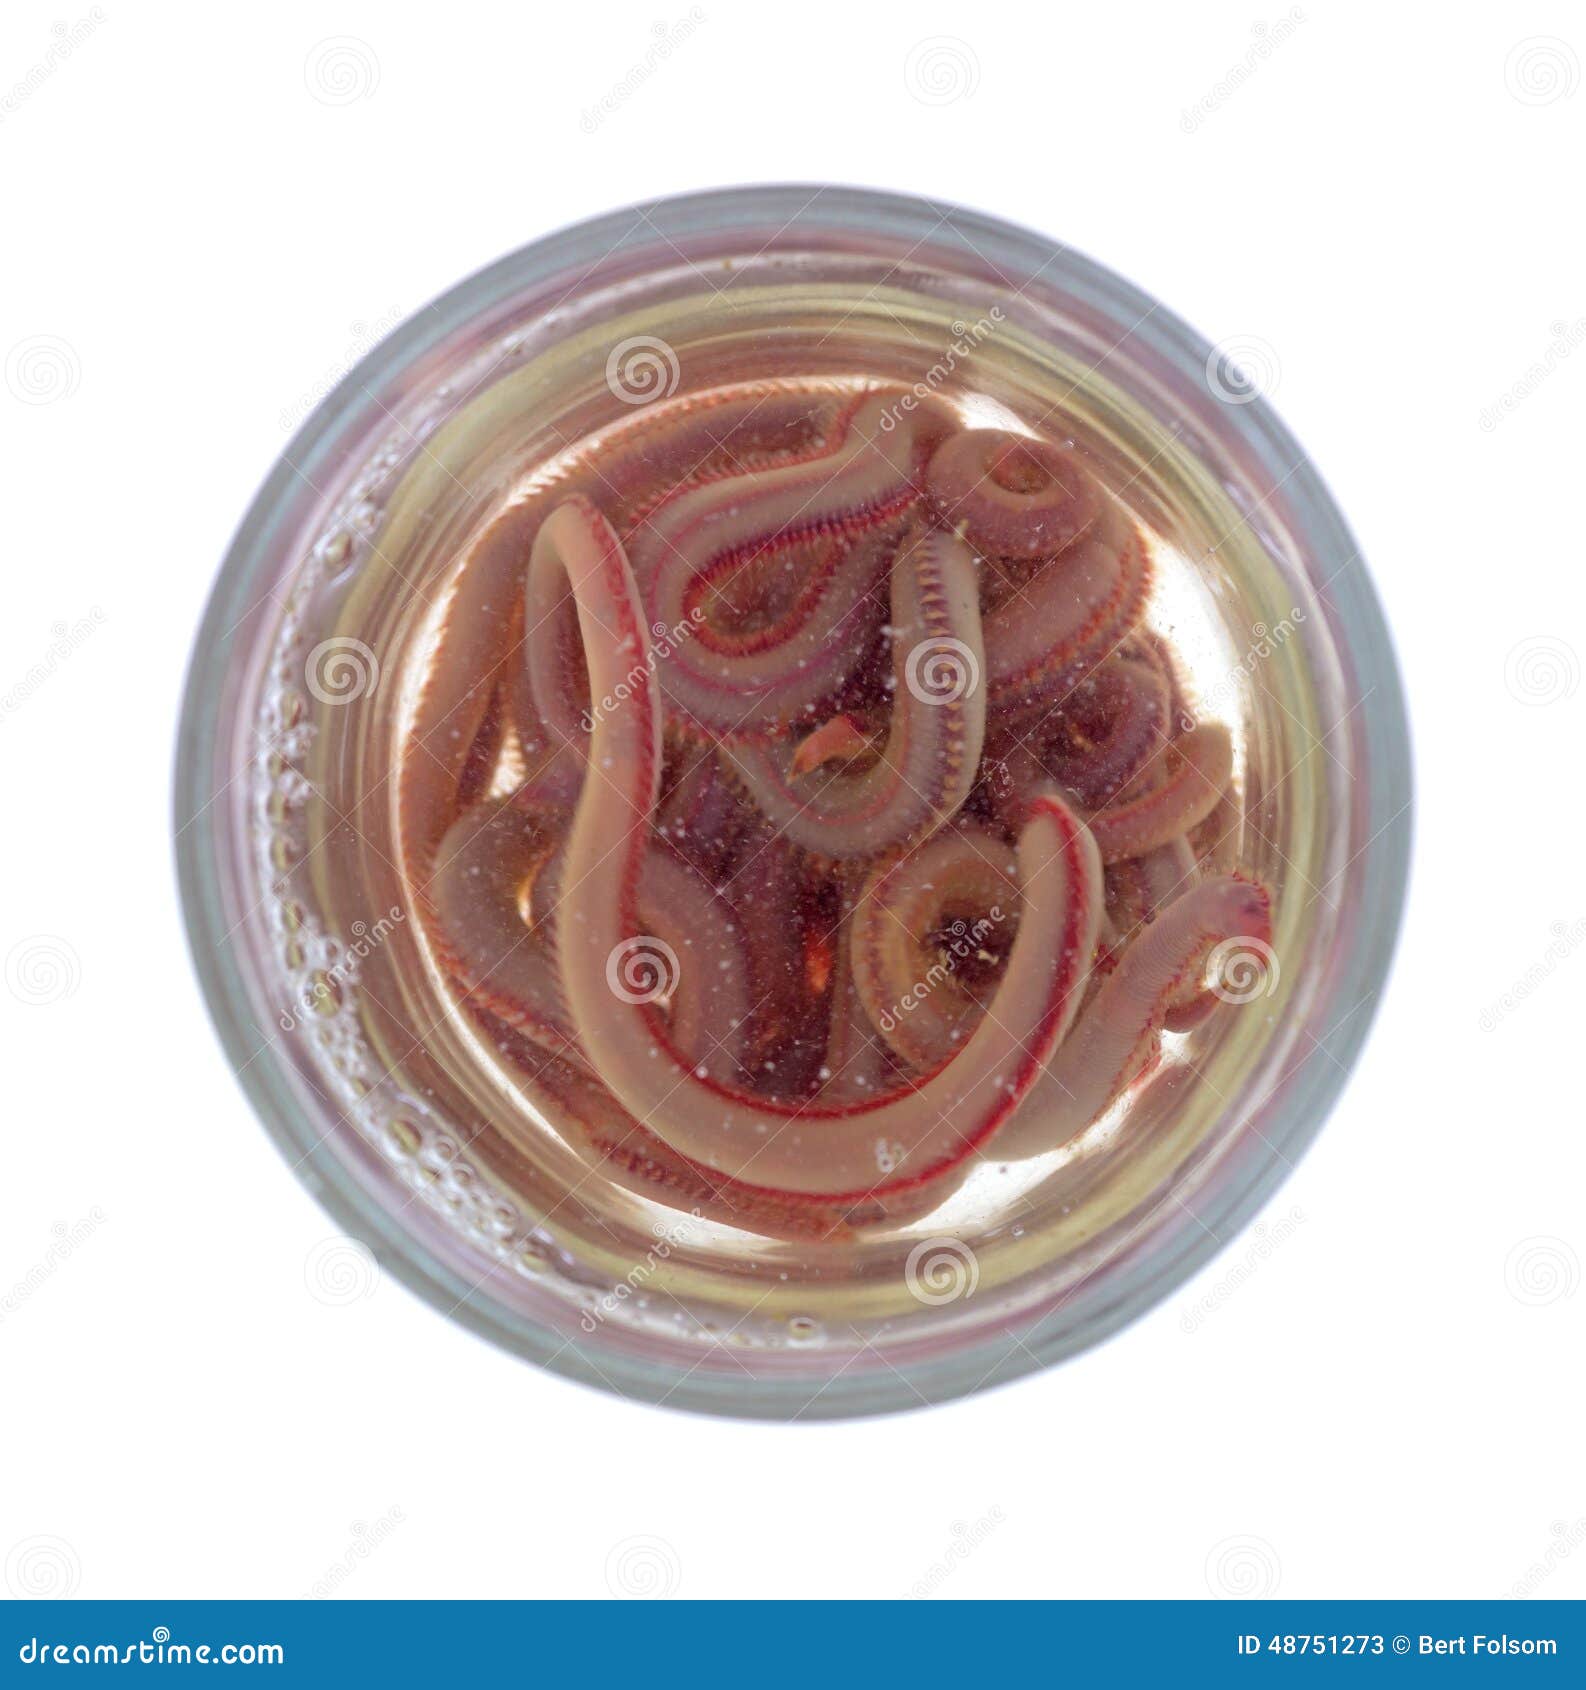 Bloodworms in a bait jar stock image. Image of expensive - 48751273